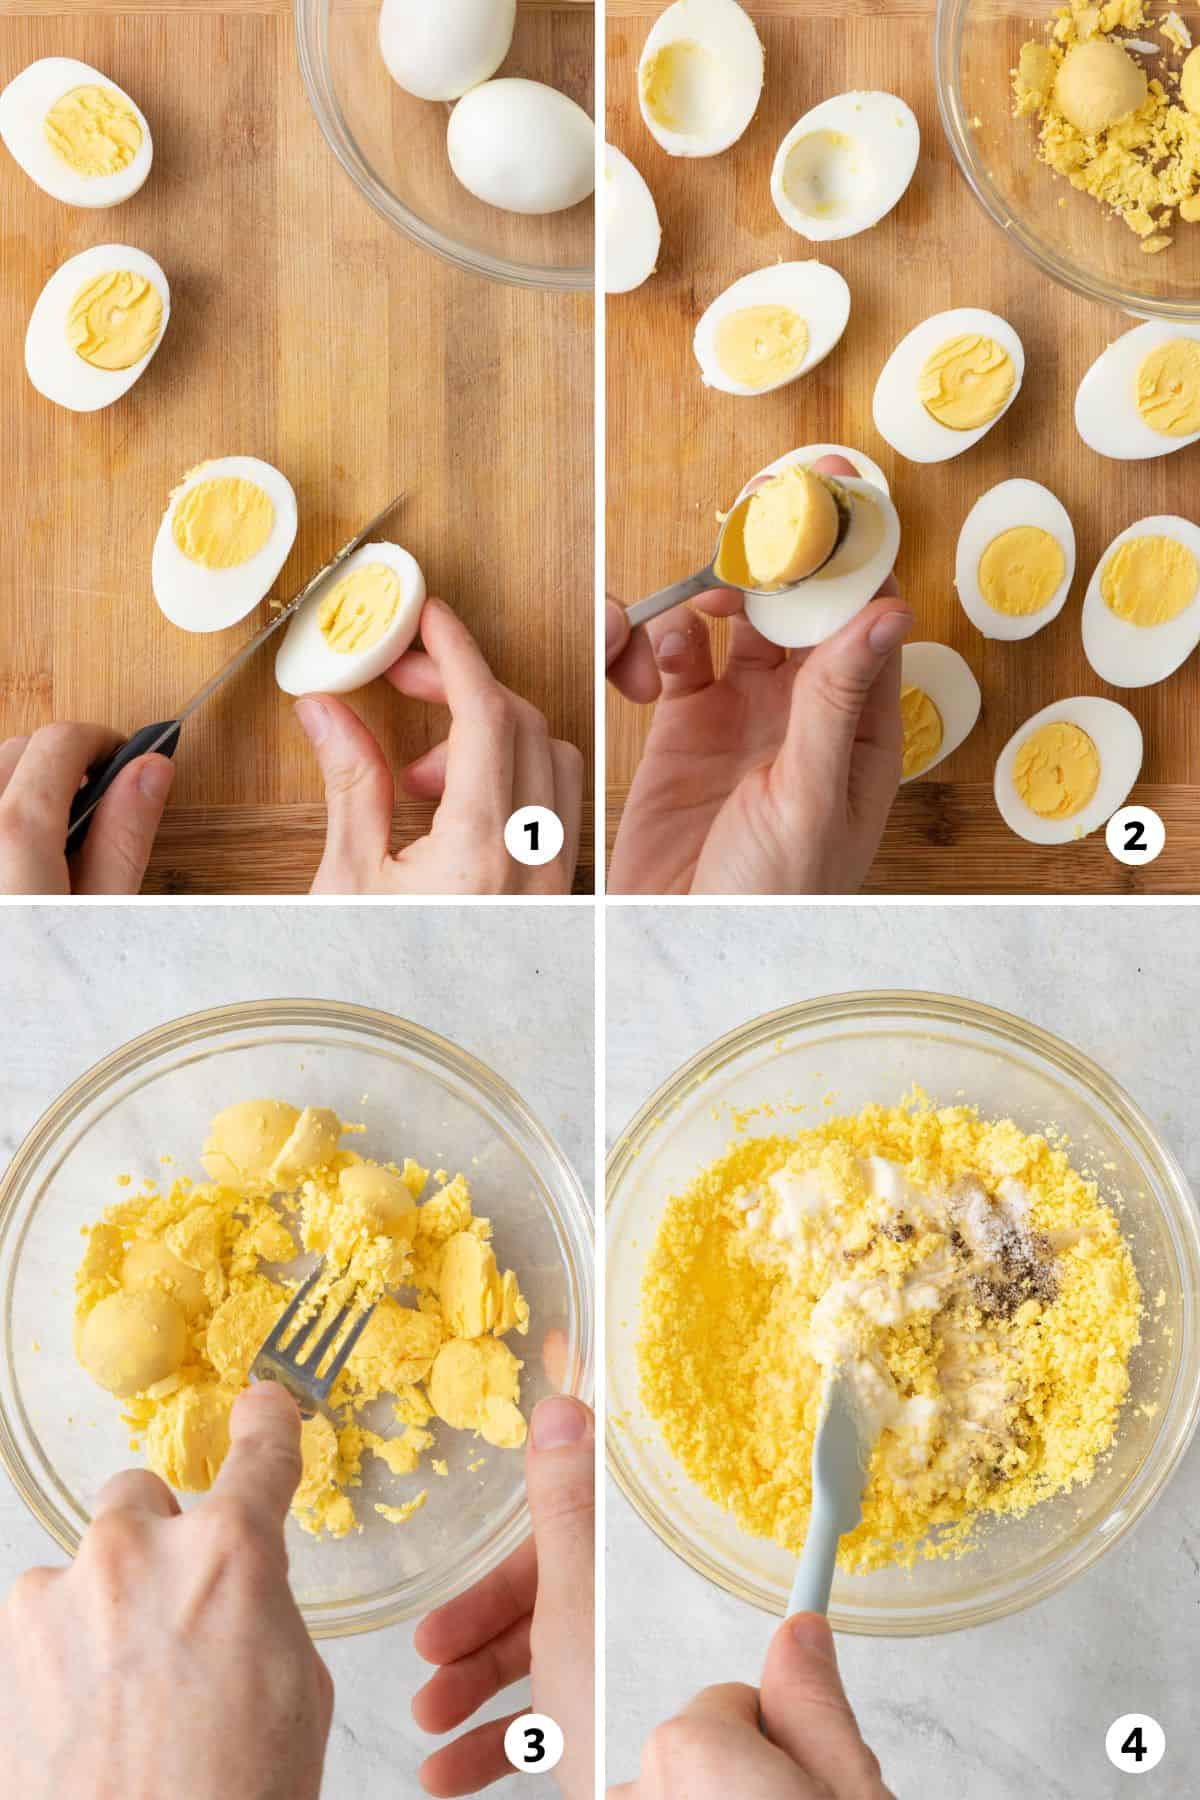 4 image collage preparing boiled eggs for recipe by cutting them in half, scooping out cooked yolk, mashing the yolk, and then mixing in the other ingredients.